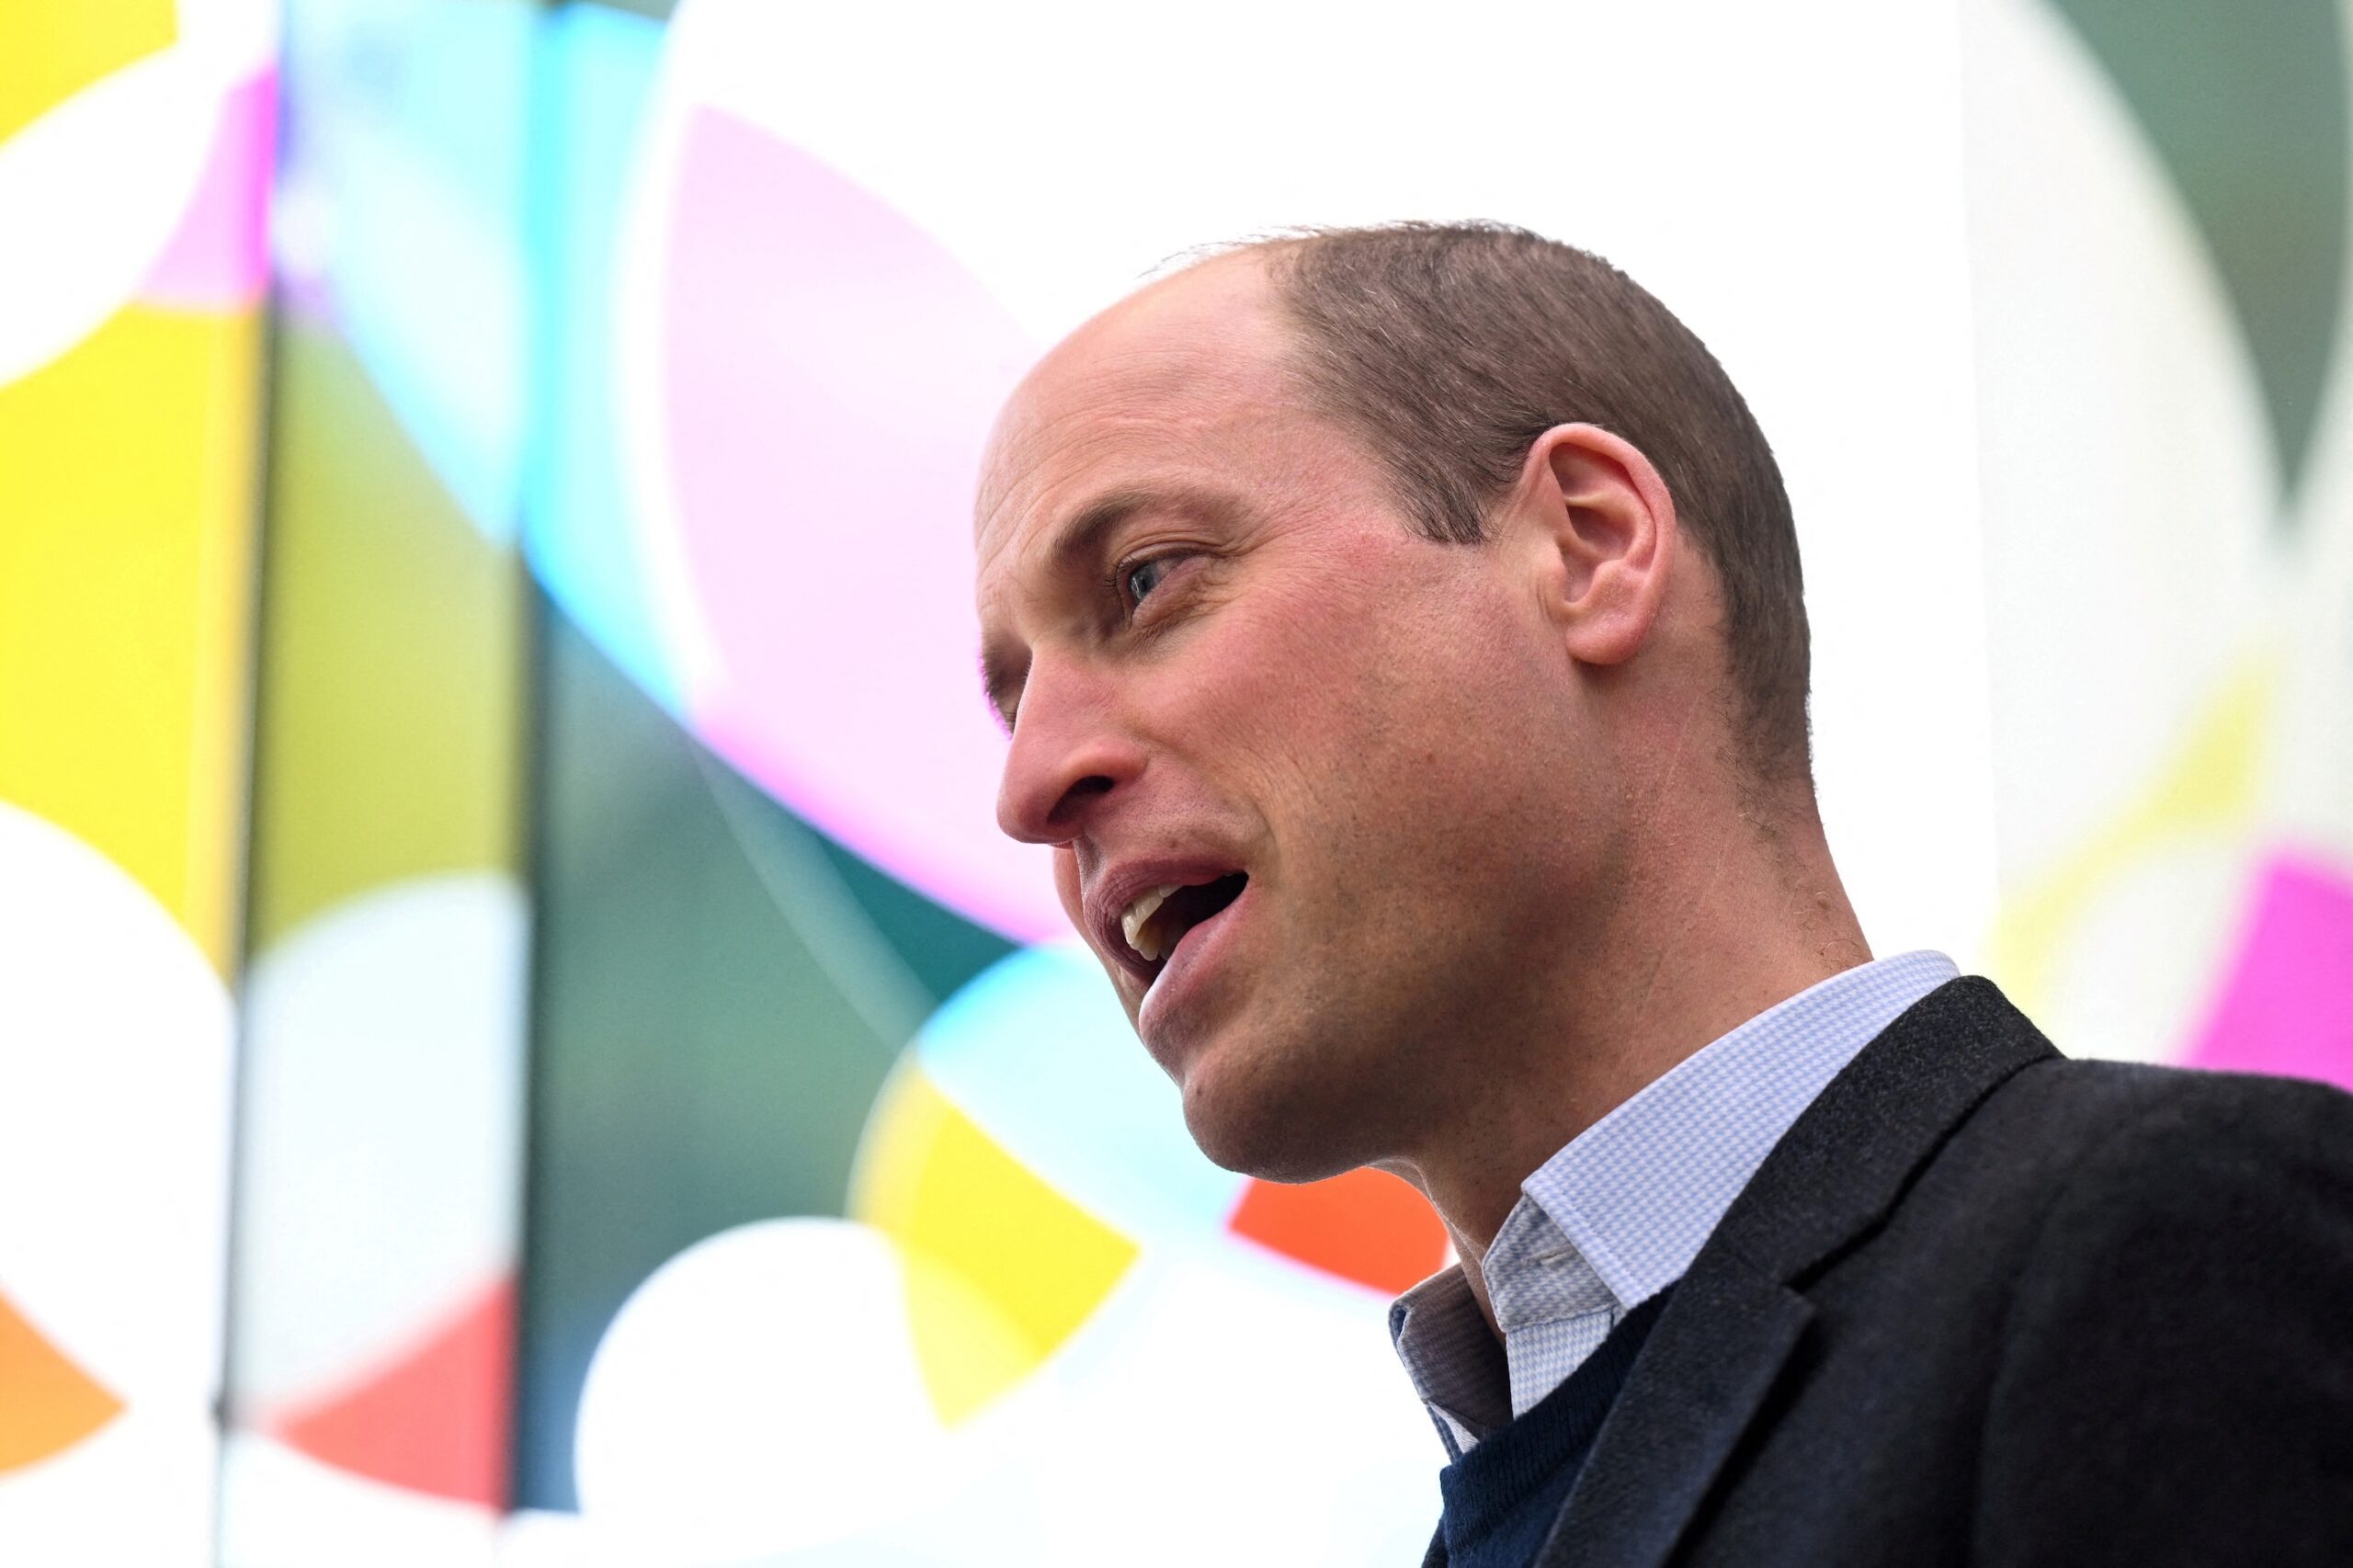 Prince William returns to public duties after wife Kate’s cancer revelation